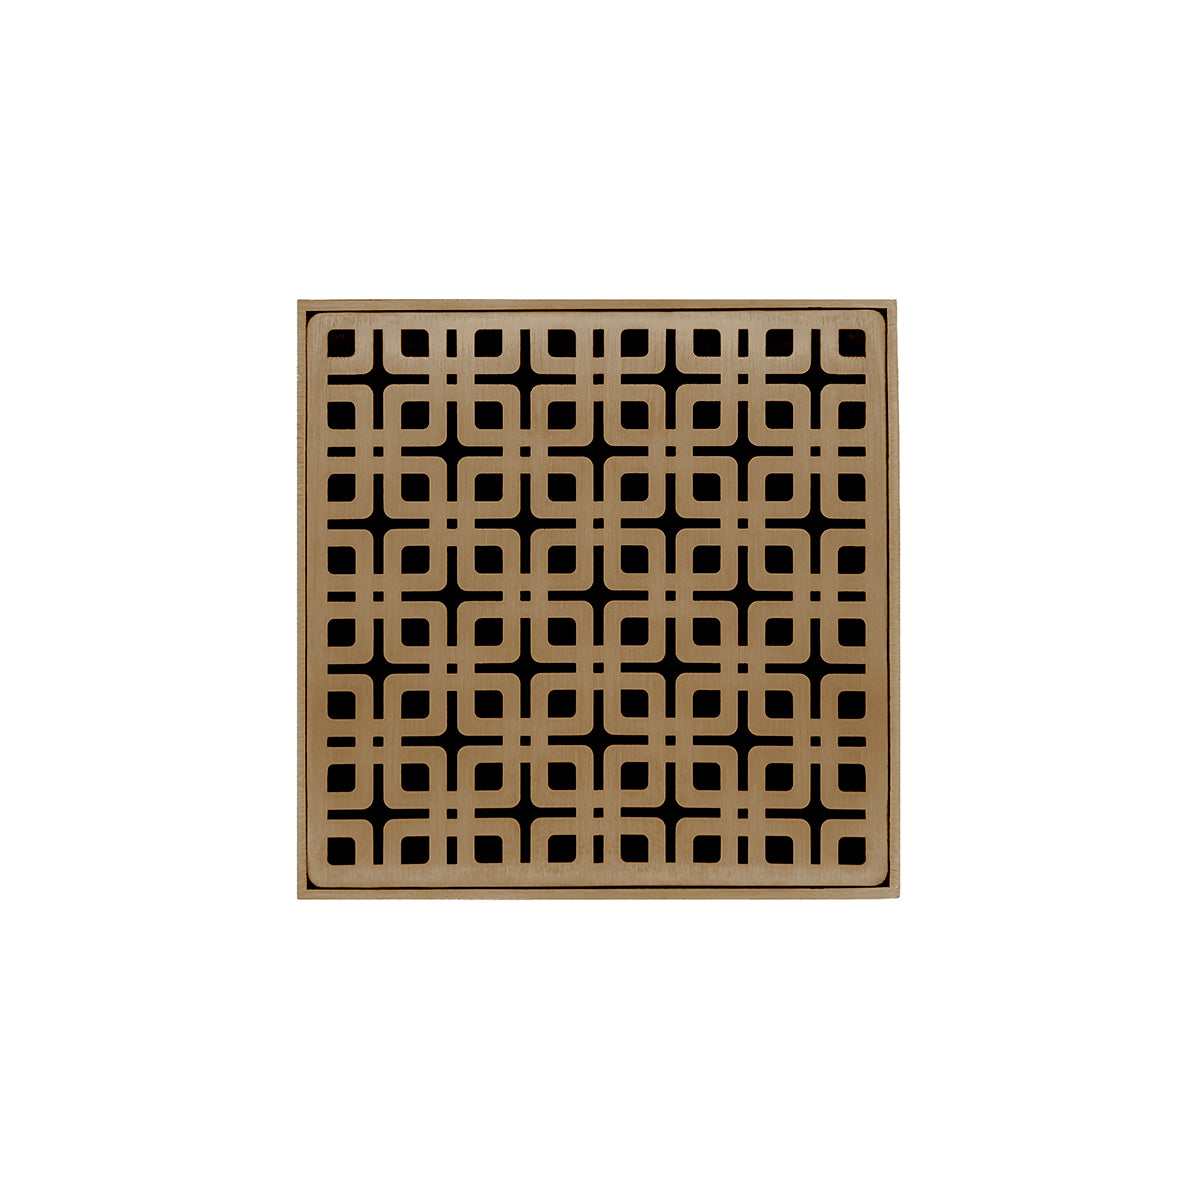 Infinity Drain 5" x 5" KD 5 Premium Center Drain Kit with Link Pattern Decorative Plate with ABS Drain Body, 2" Outlet